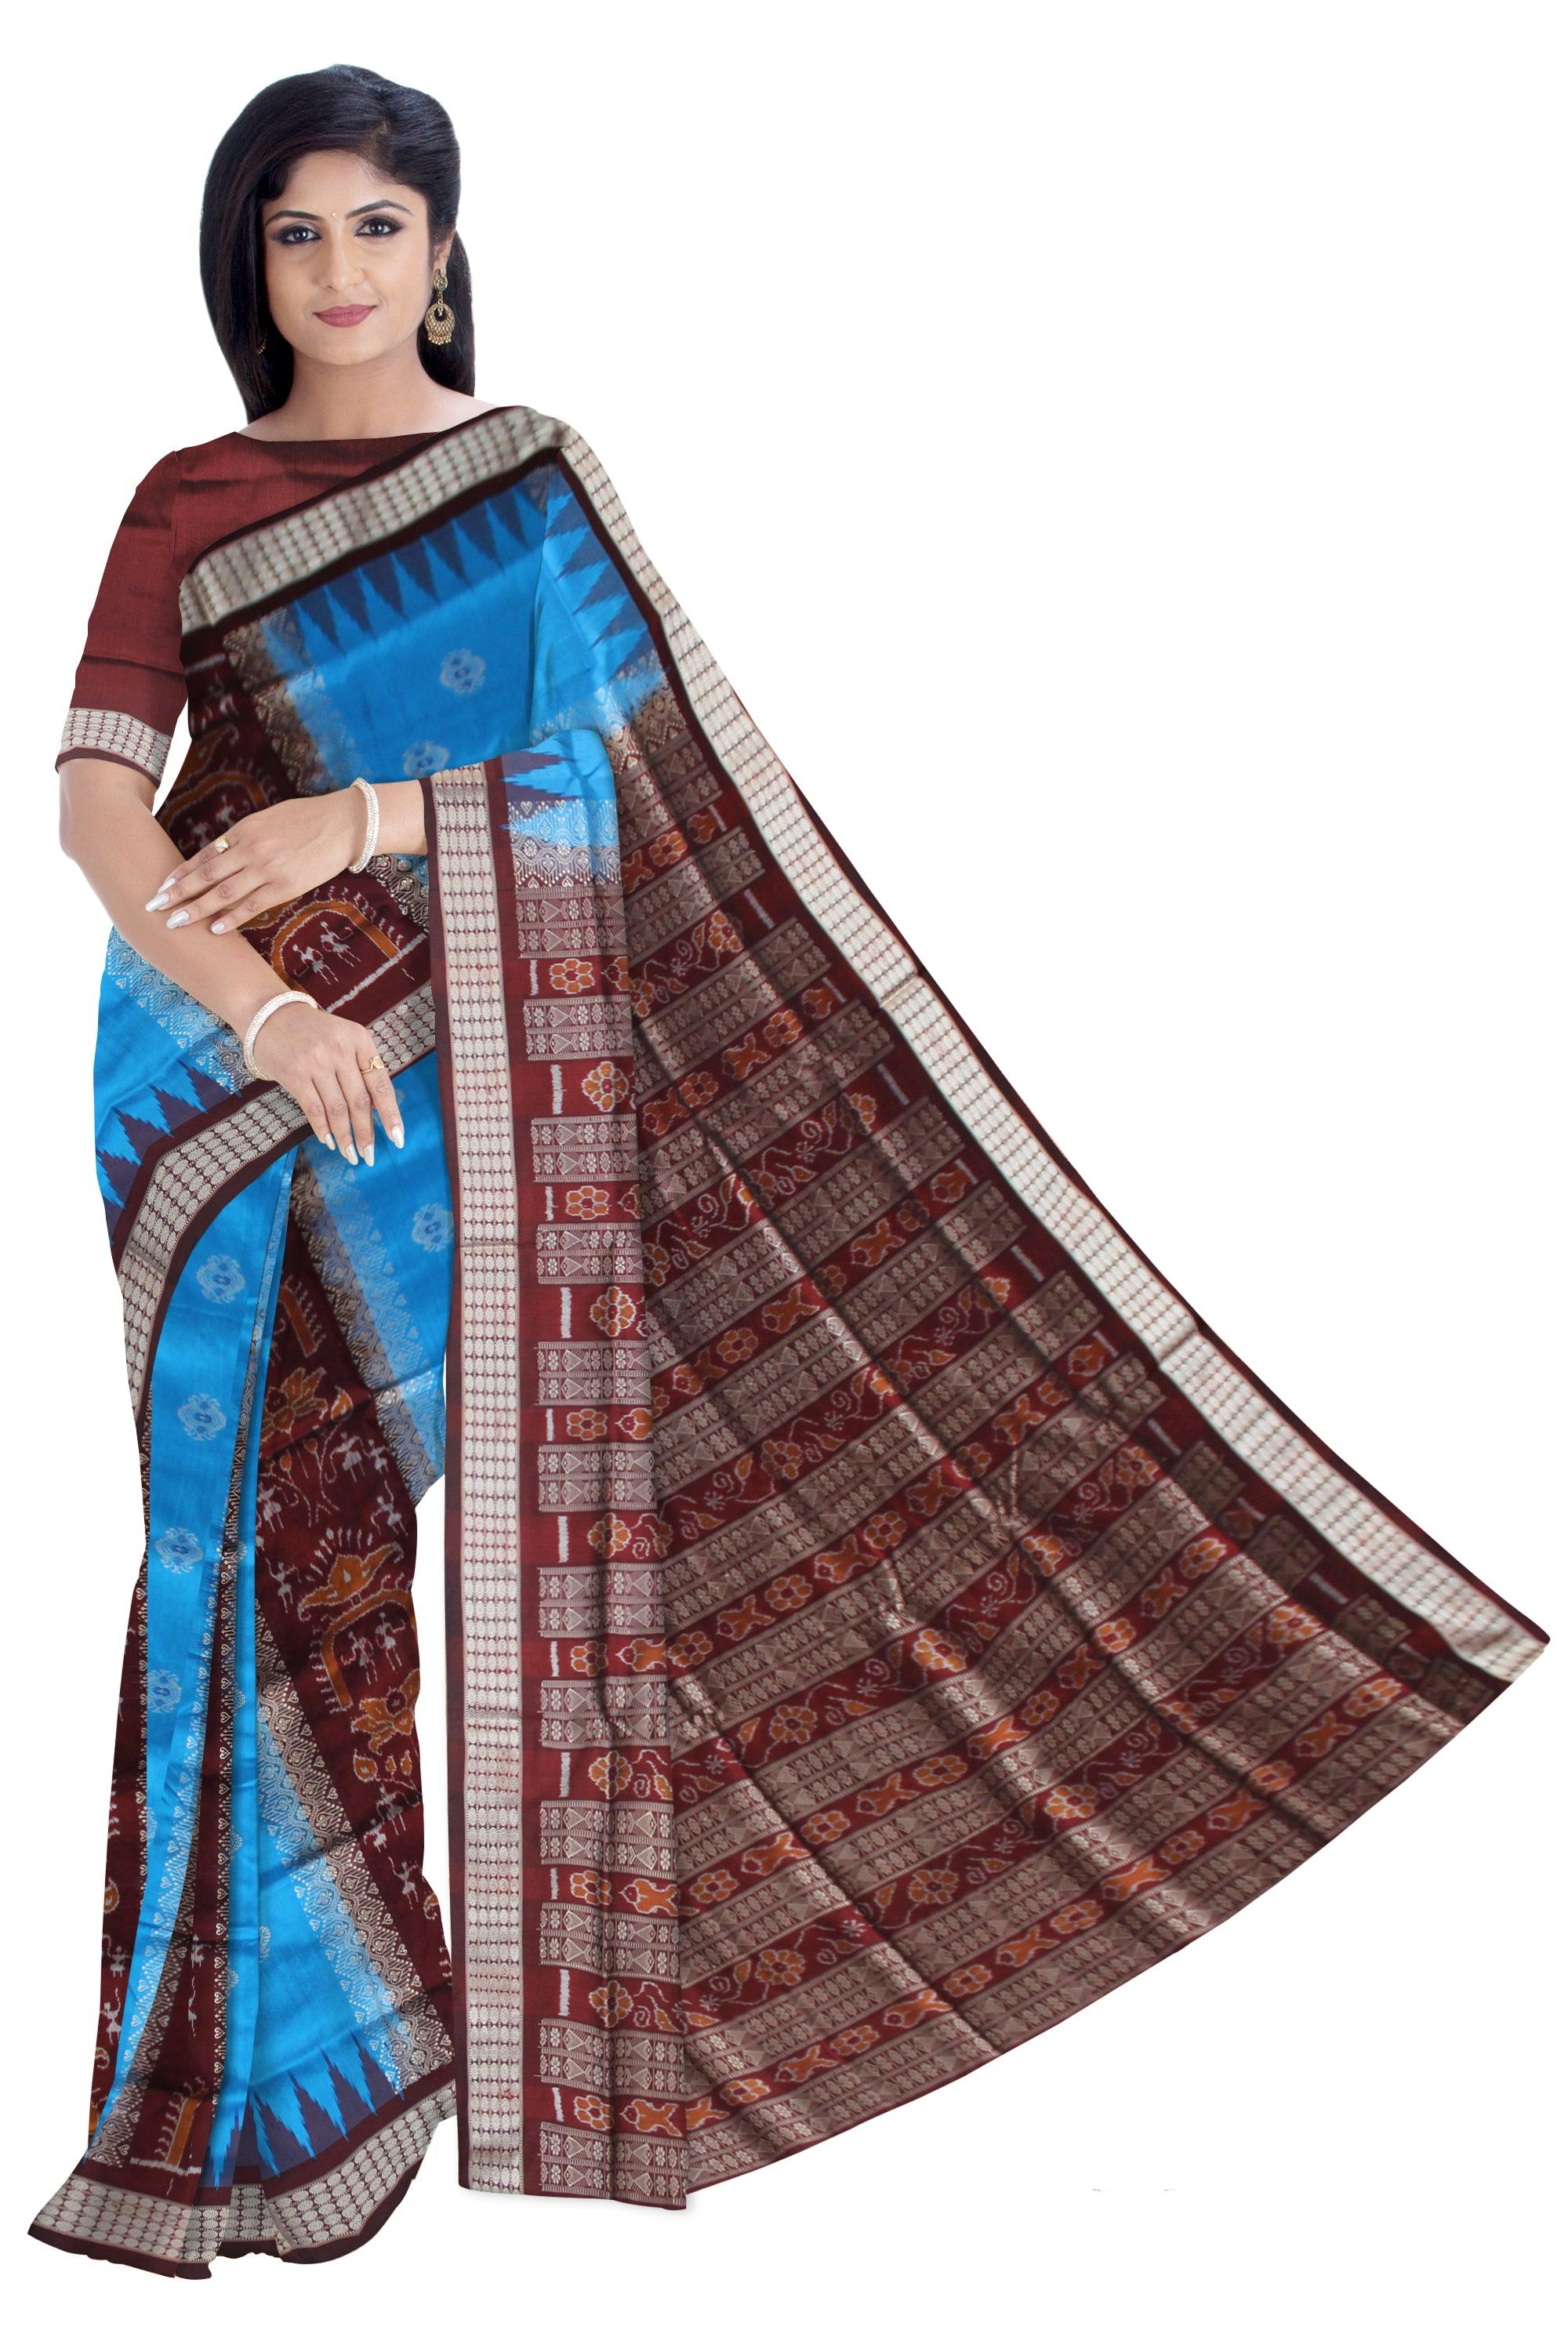 TERRACOTTA WITH BOMKEI PATTERN NEW COLLECTION  PURE SILK SAREE IS SKY AND COFFEE COLOR BASE, COMES WITH MATCHNG BLOUSE PIECE. - Koshali Arts & Crafts Enterprise